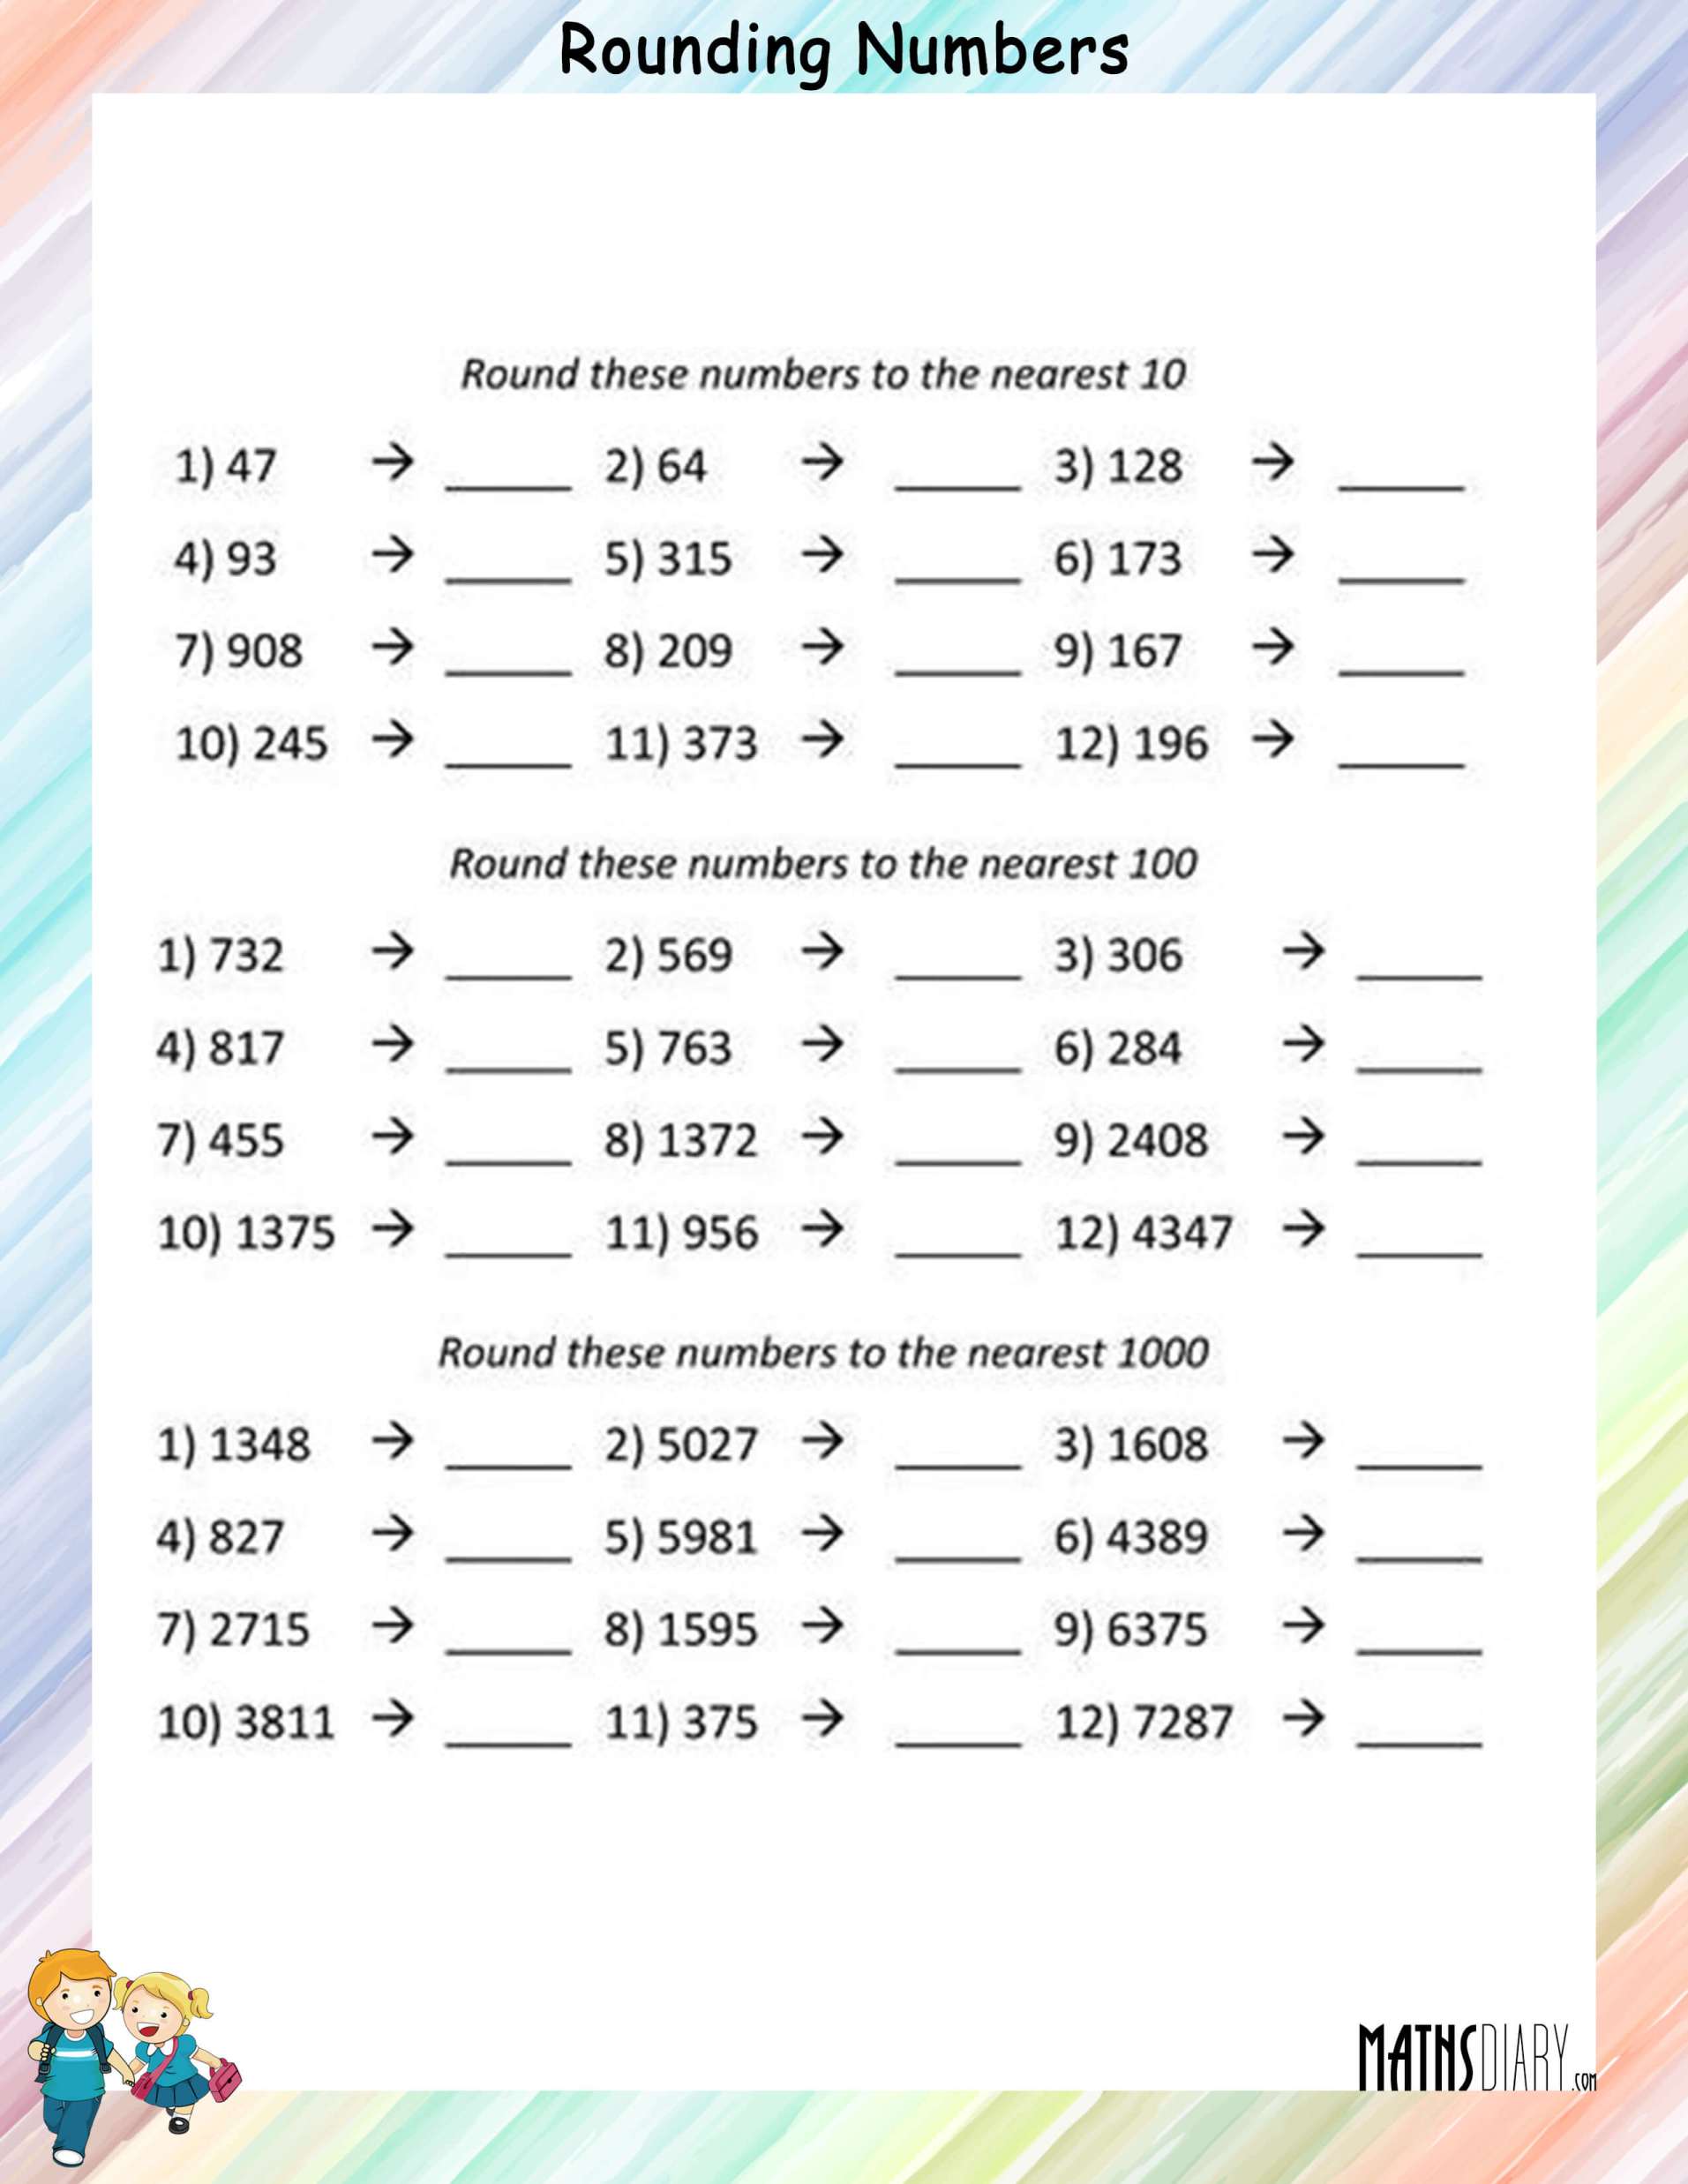 rounding-numbers-math-worksheets